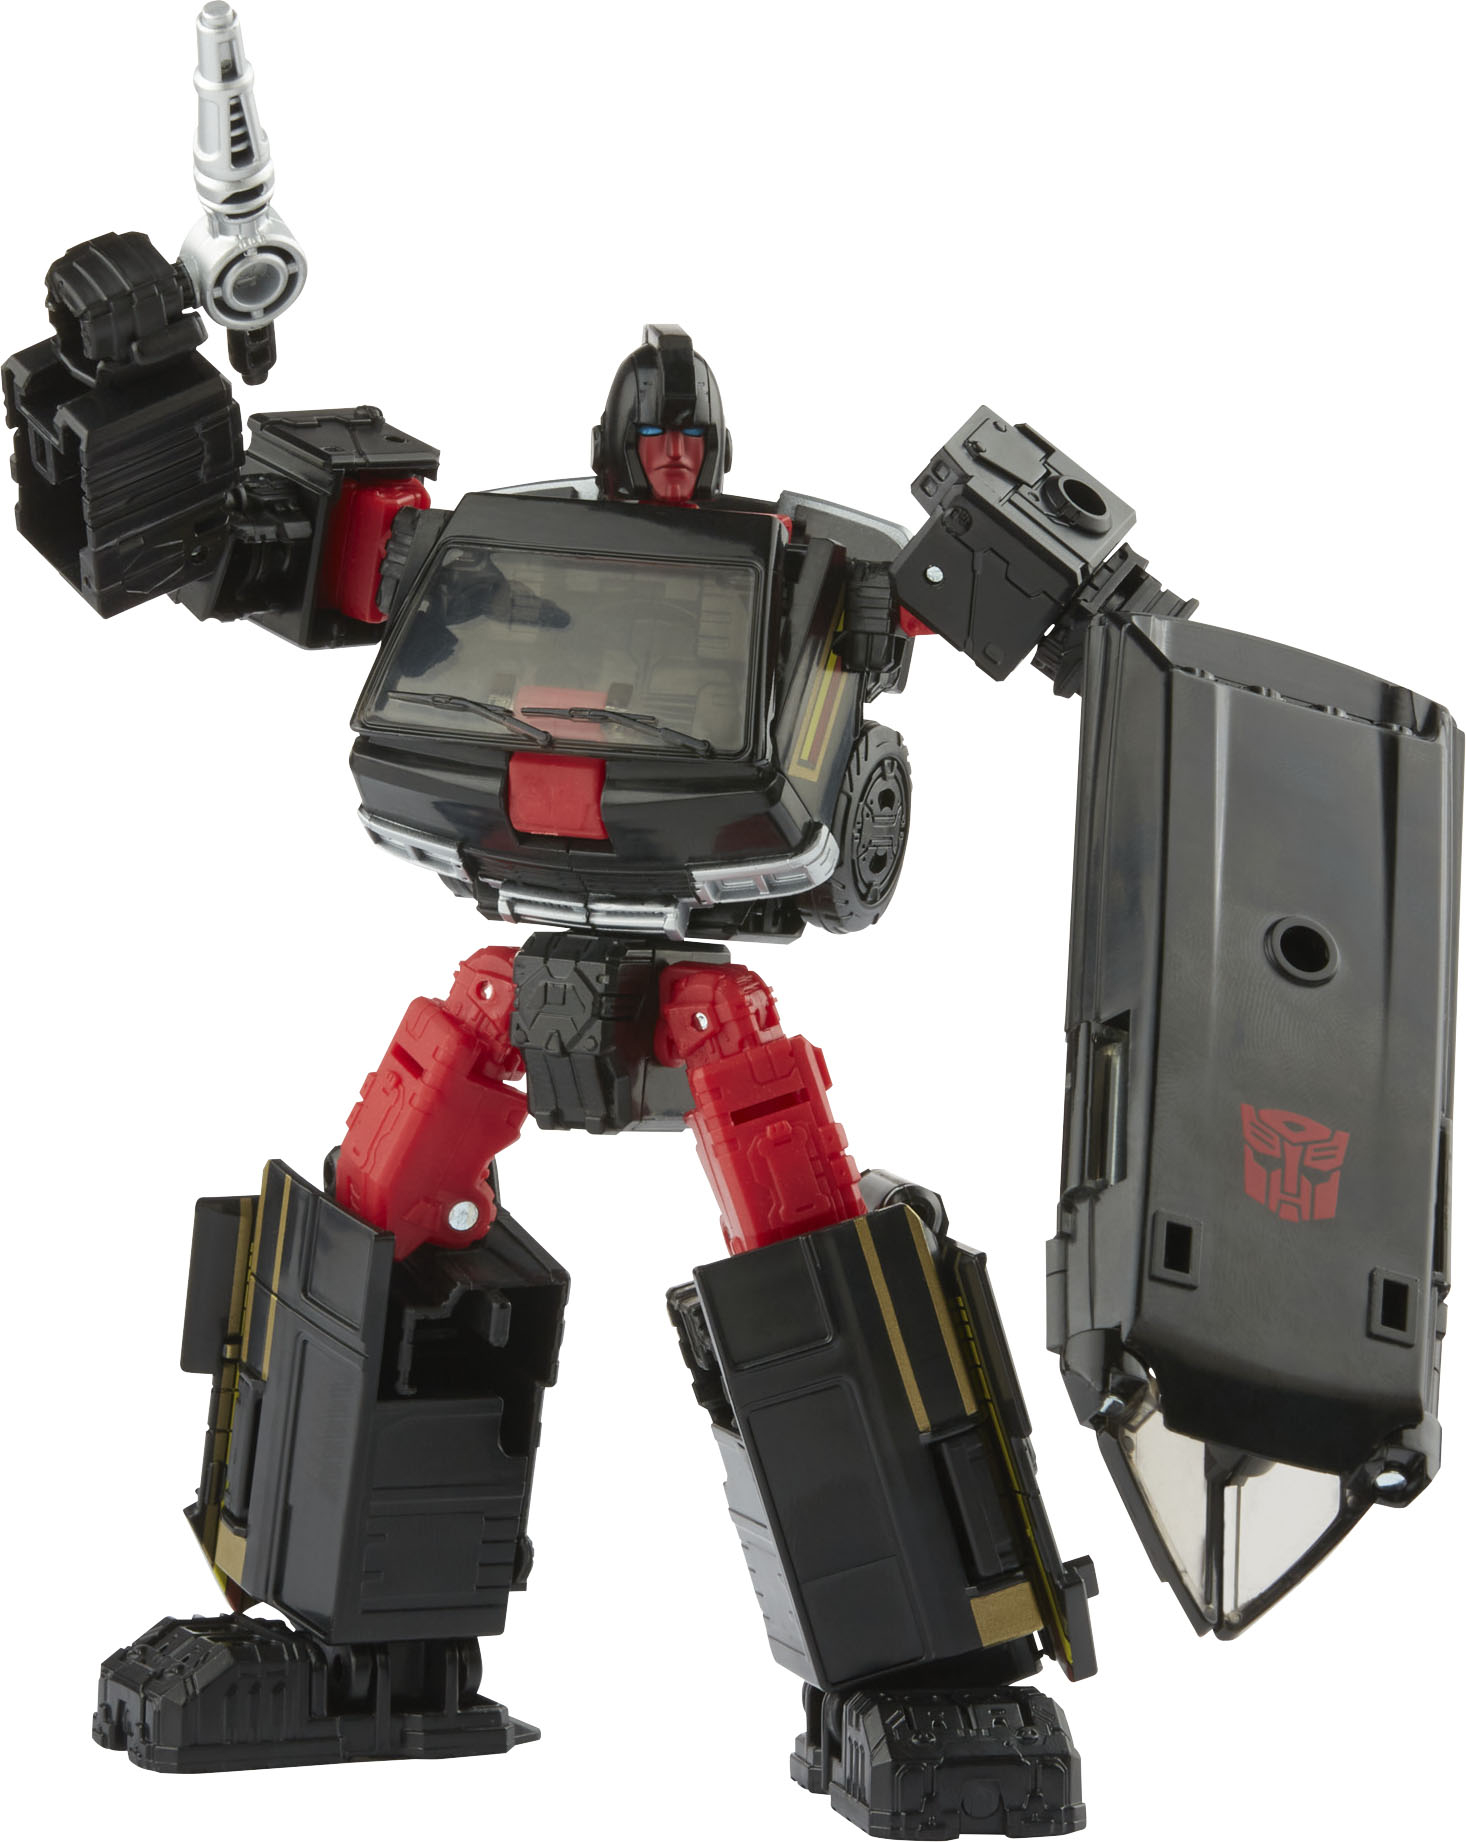 Angle View: Transformers - Generations War for Cybertron Deluxe WFC-E18 Airwave Modulator